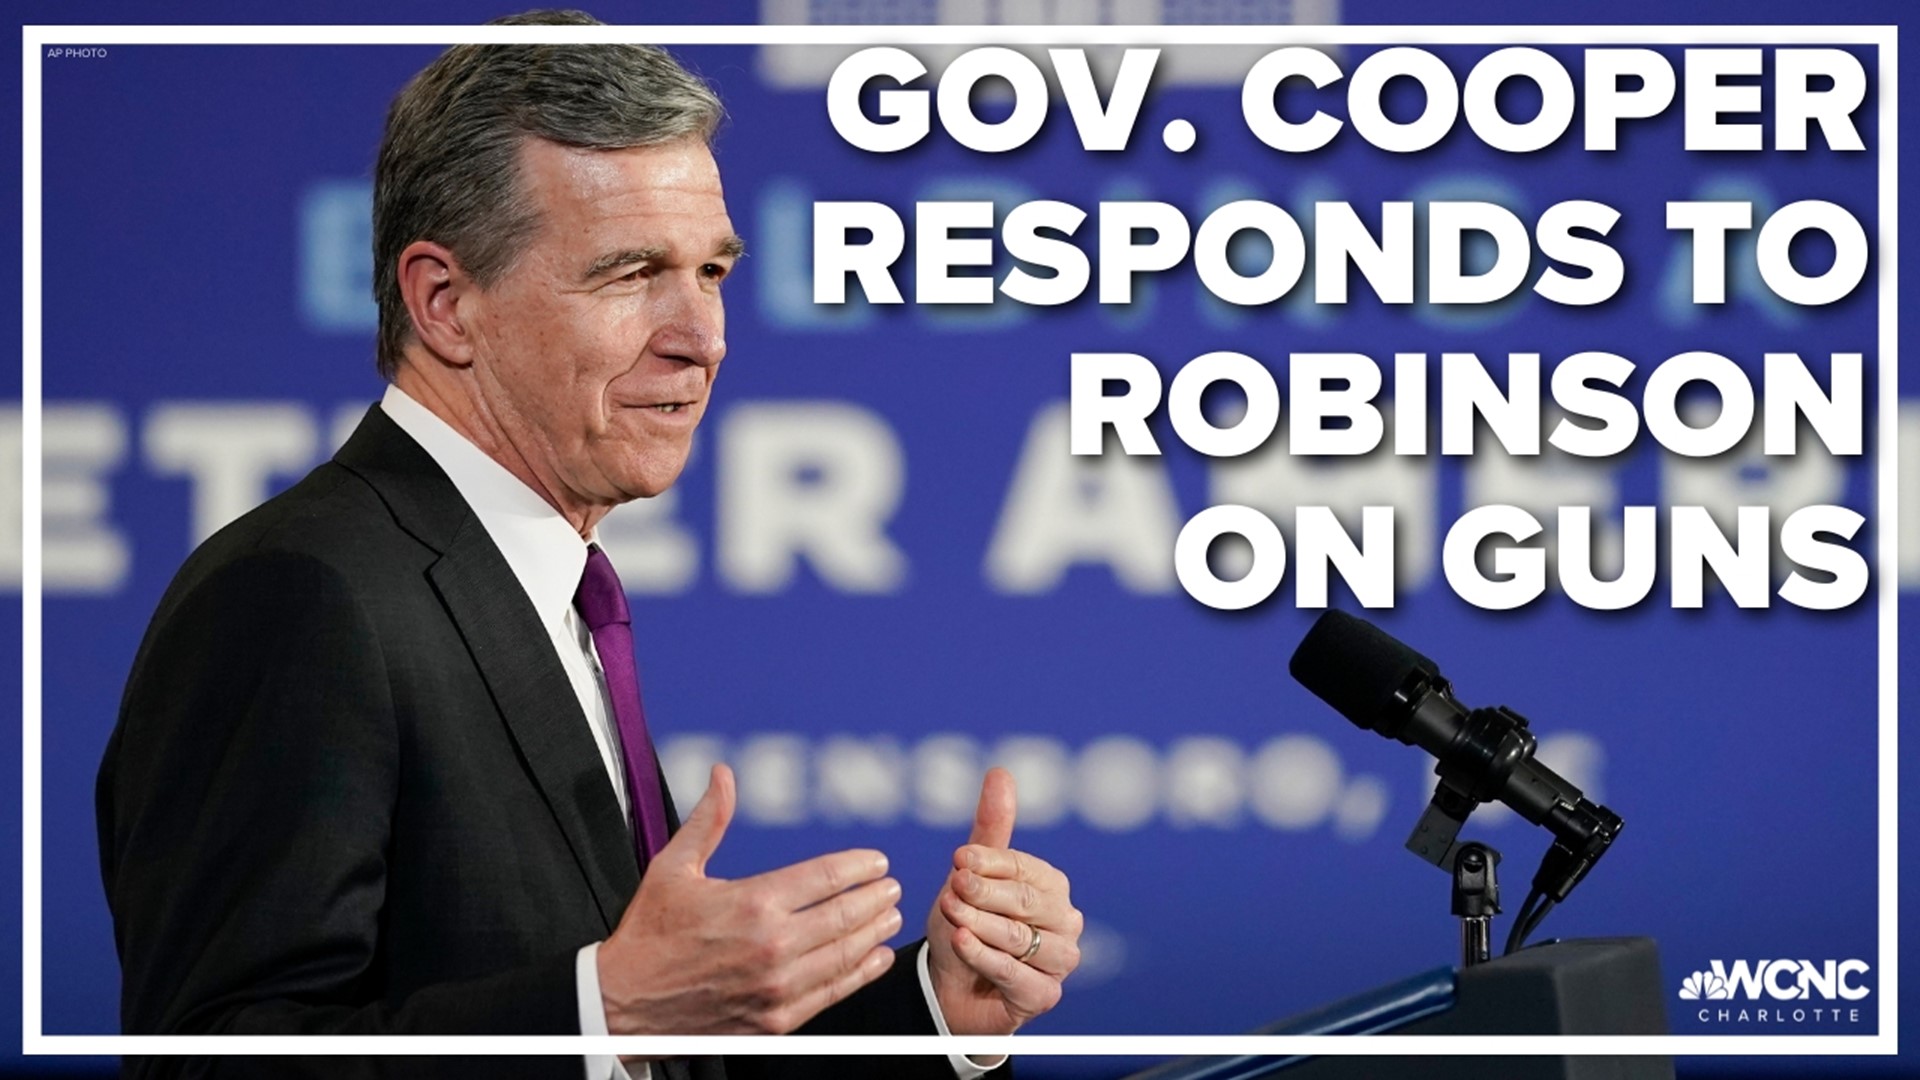 Governor Roy Cooper is criticizing the Lieutenant Governor, calling his recent comments on guns "dangerous and shameful."